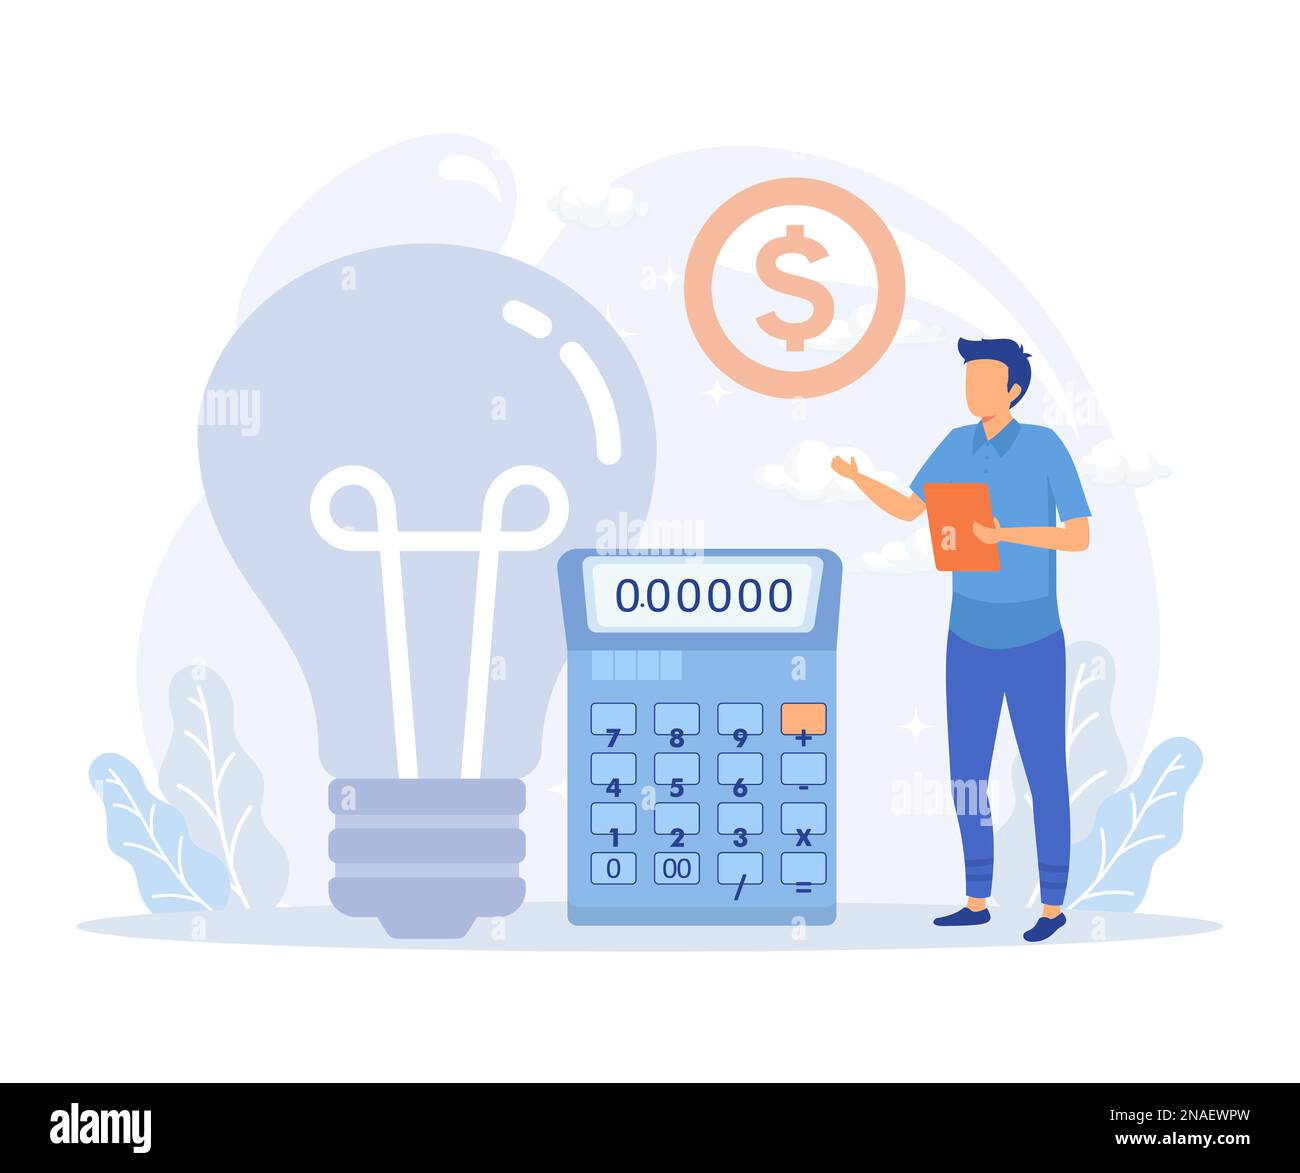 Sustainability illustration. Energy consumption in household. Characters using energy efficient devices, paying less and saving money. flat vector mod Stock Vector